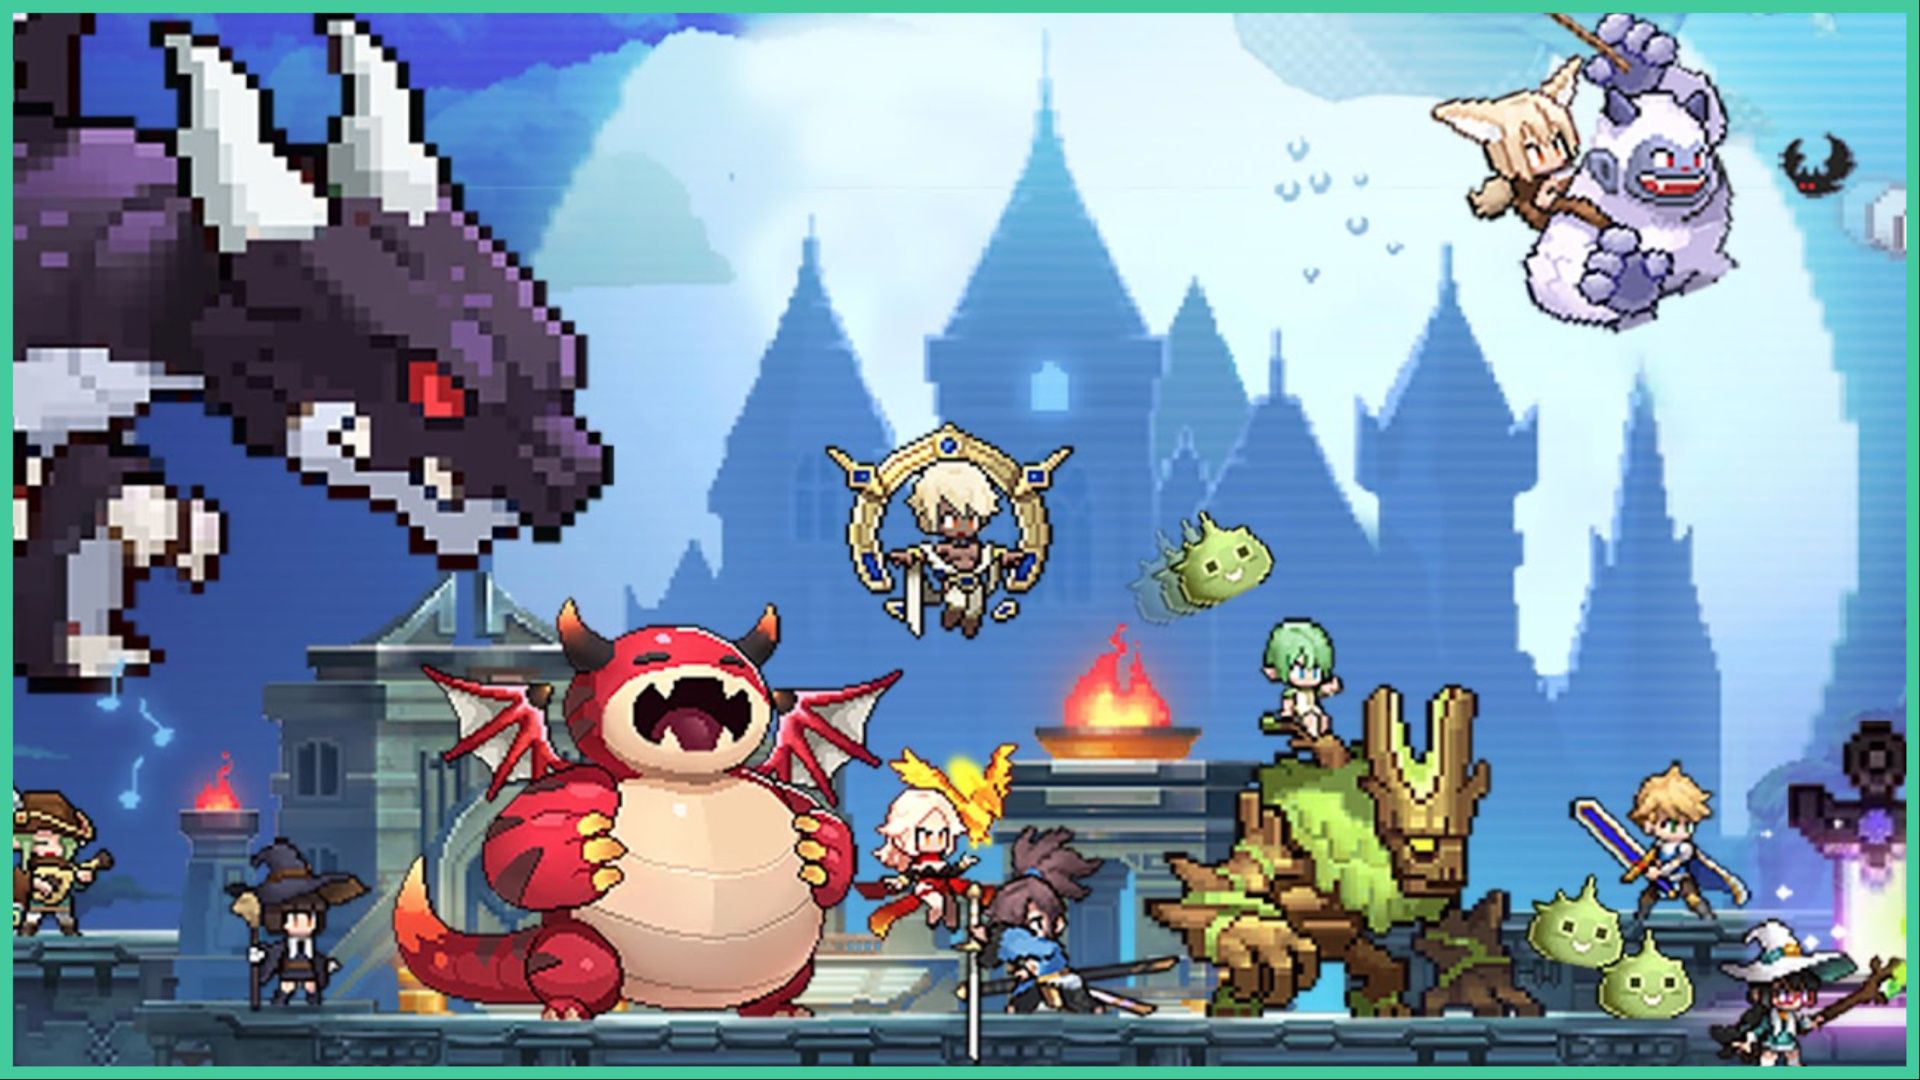 feature image for our pixel heroes tier list, the image features promo art for the game with pixelated characters all looking ahead as they hold their weapons, there is a giant dragon to the left, a round smaller dragon yawning while standing next to the heroes, and a yeti flying through the sky with a character on its back, there is also a faint castle in the distance, as all of the characters stand on a stone bridge lit with fire torches